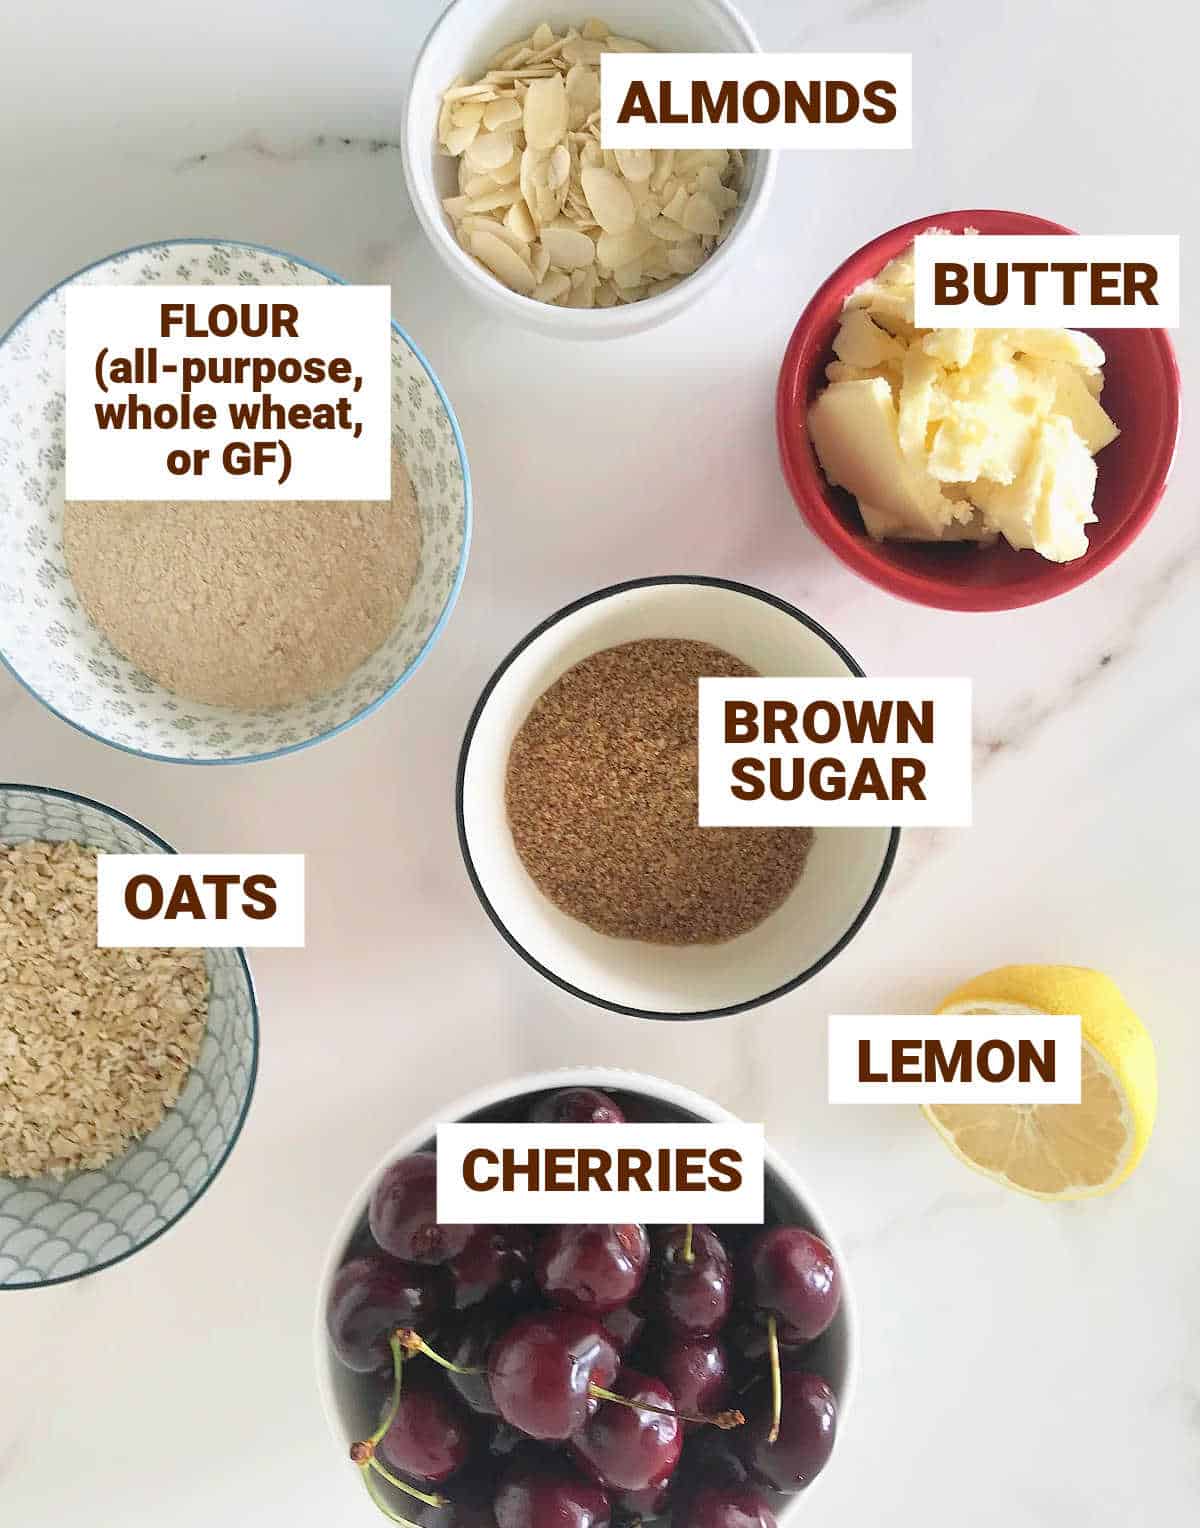 Colorful bowls on white surface with ingredients for almond cherry crisp including lemon, butter, brown sugar, oats.